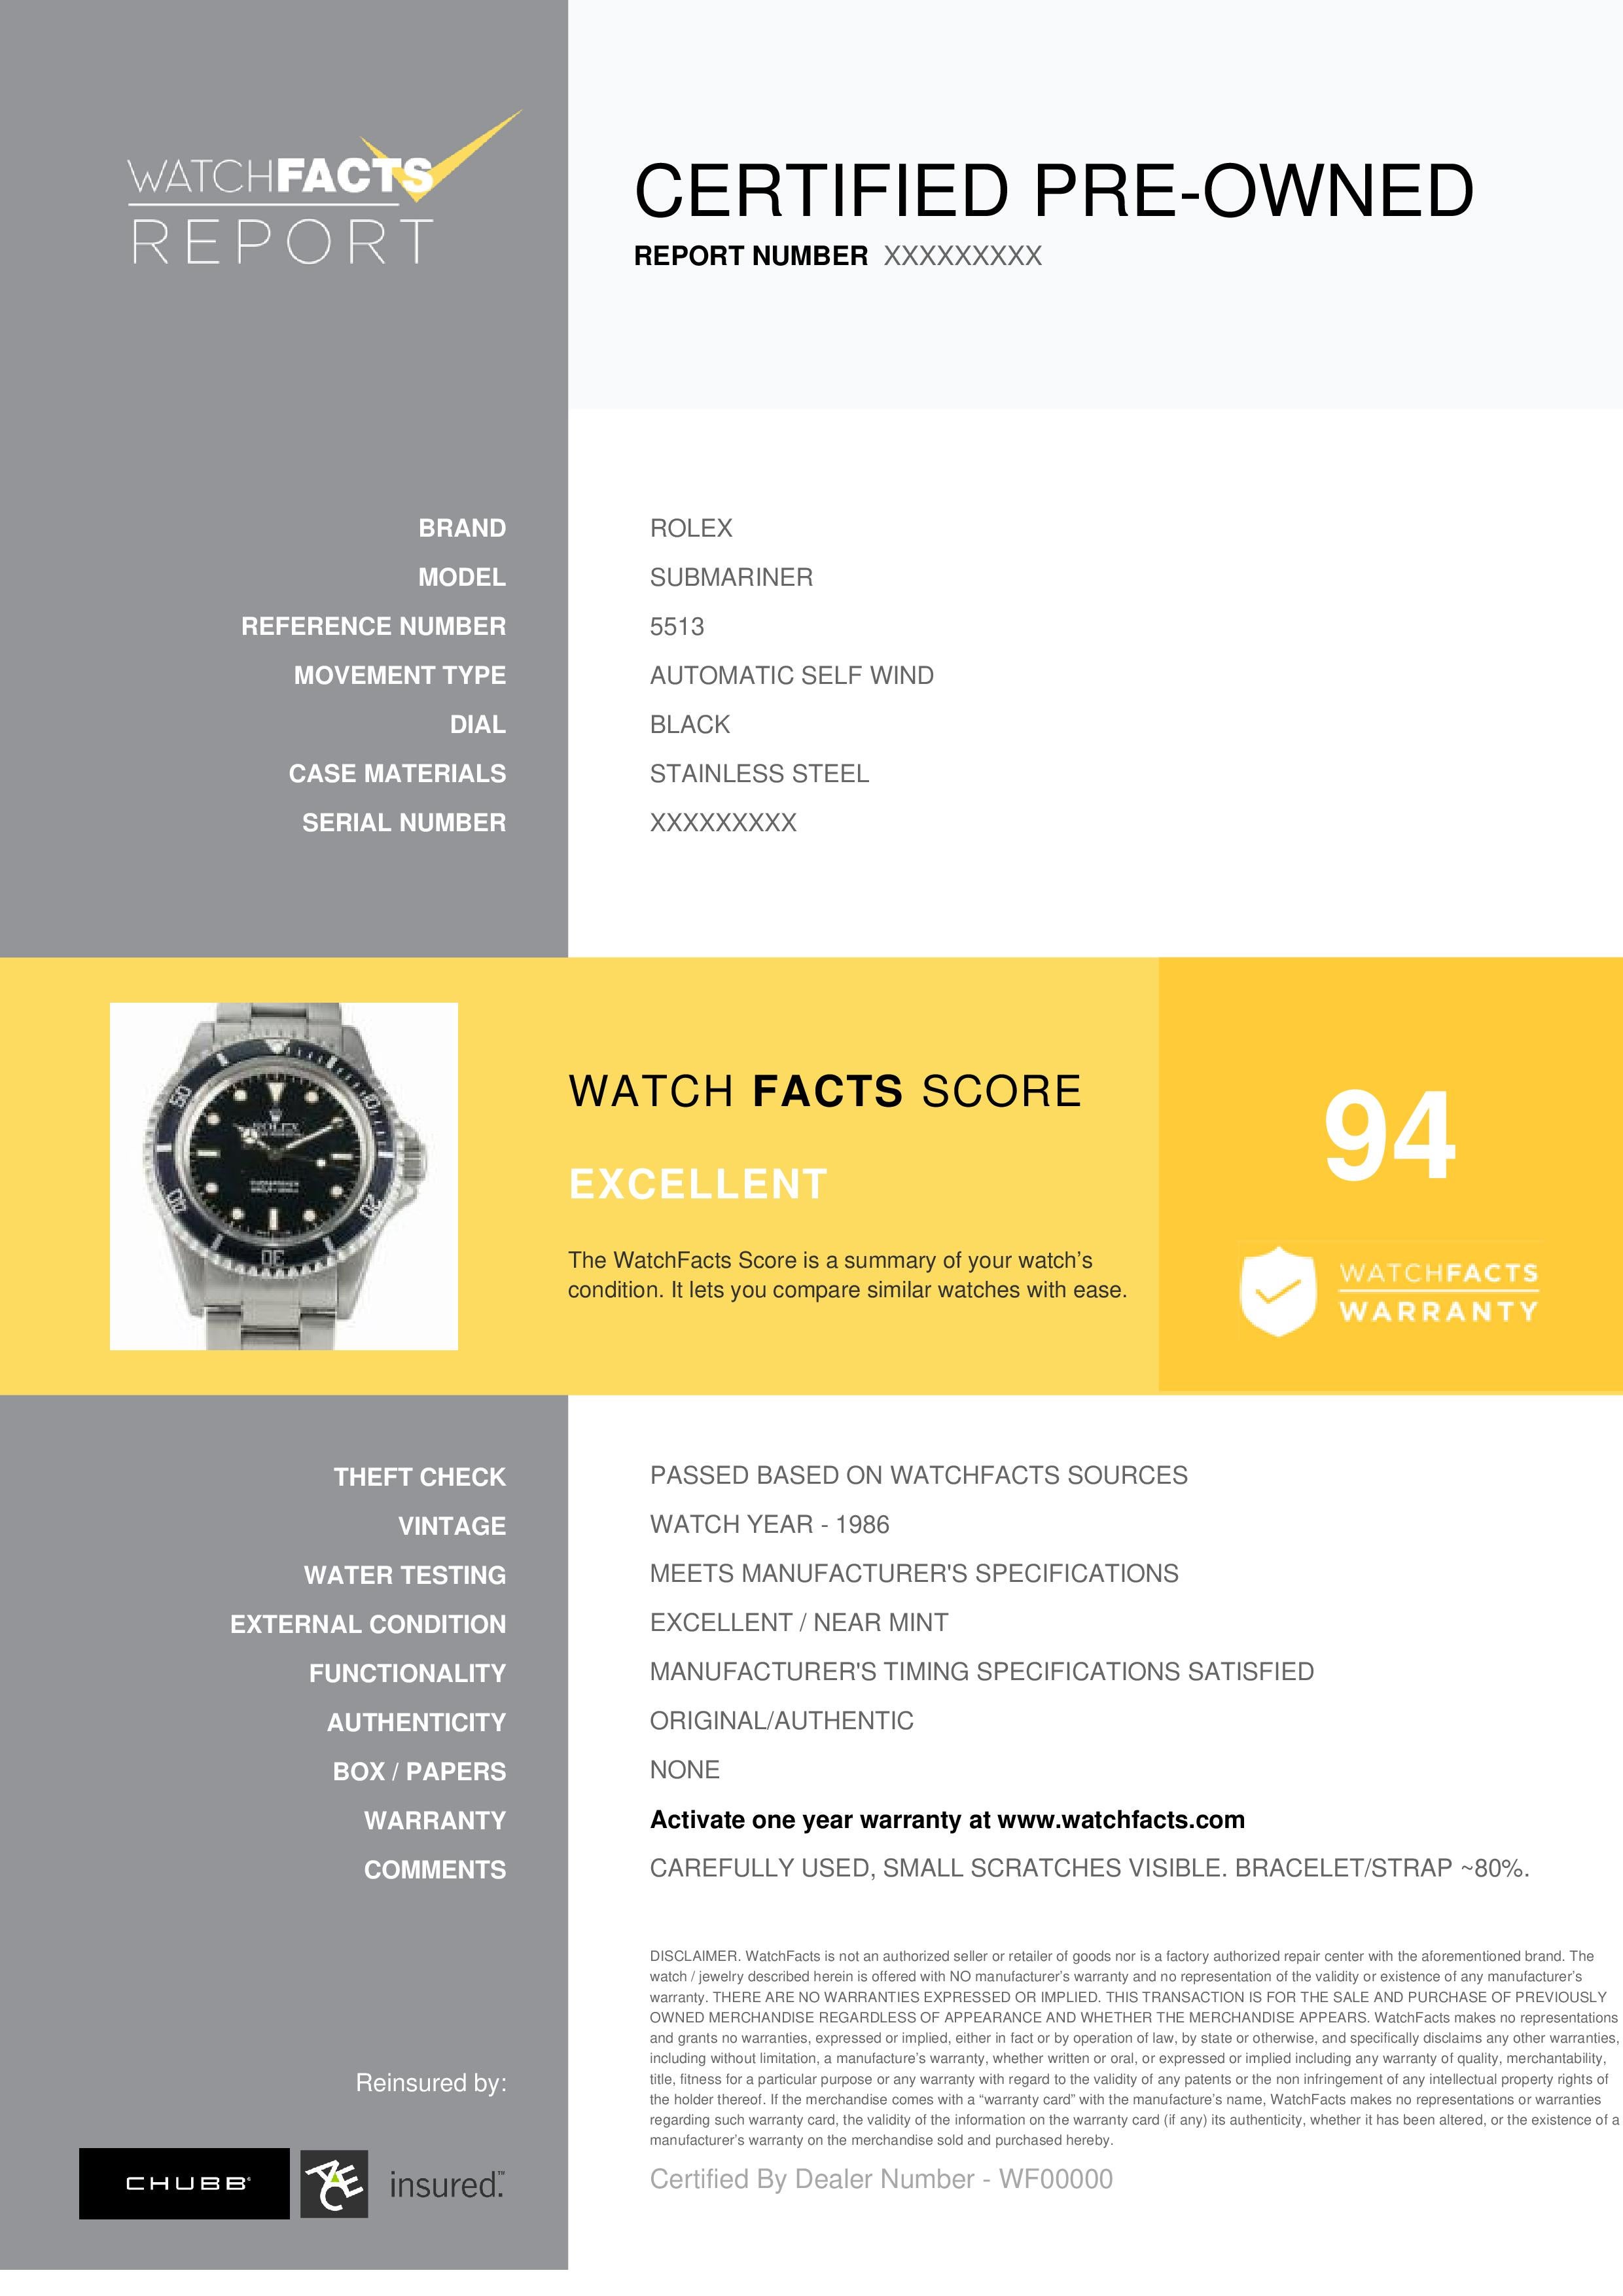 Rolex Submariner Reference #: 5513. Mens Automatic Self Wind Watch Stainless Steel Black 40 MM. Verified and Certified by WatchFacts. 1 year warranty offered by WatchFacts.
